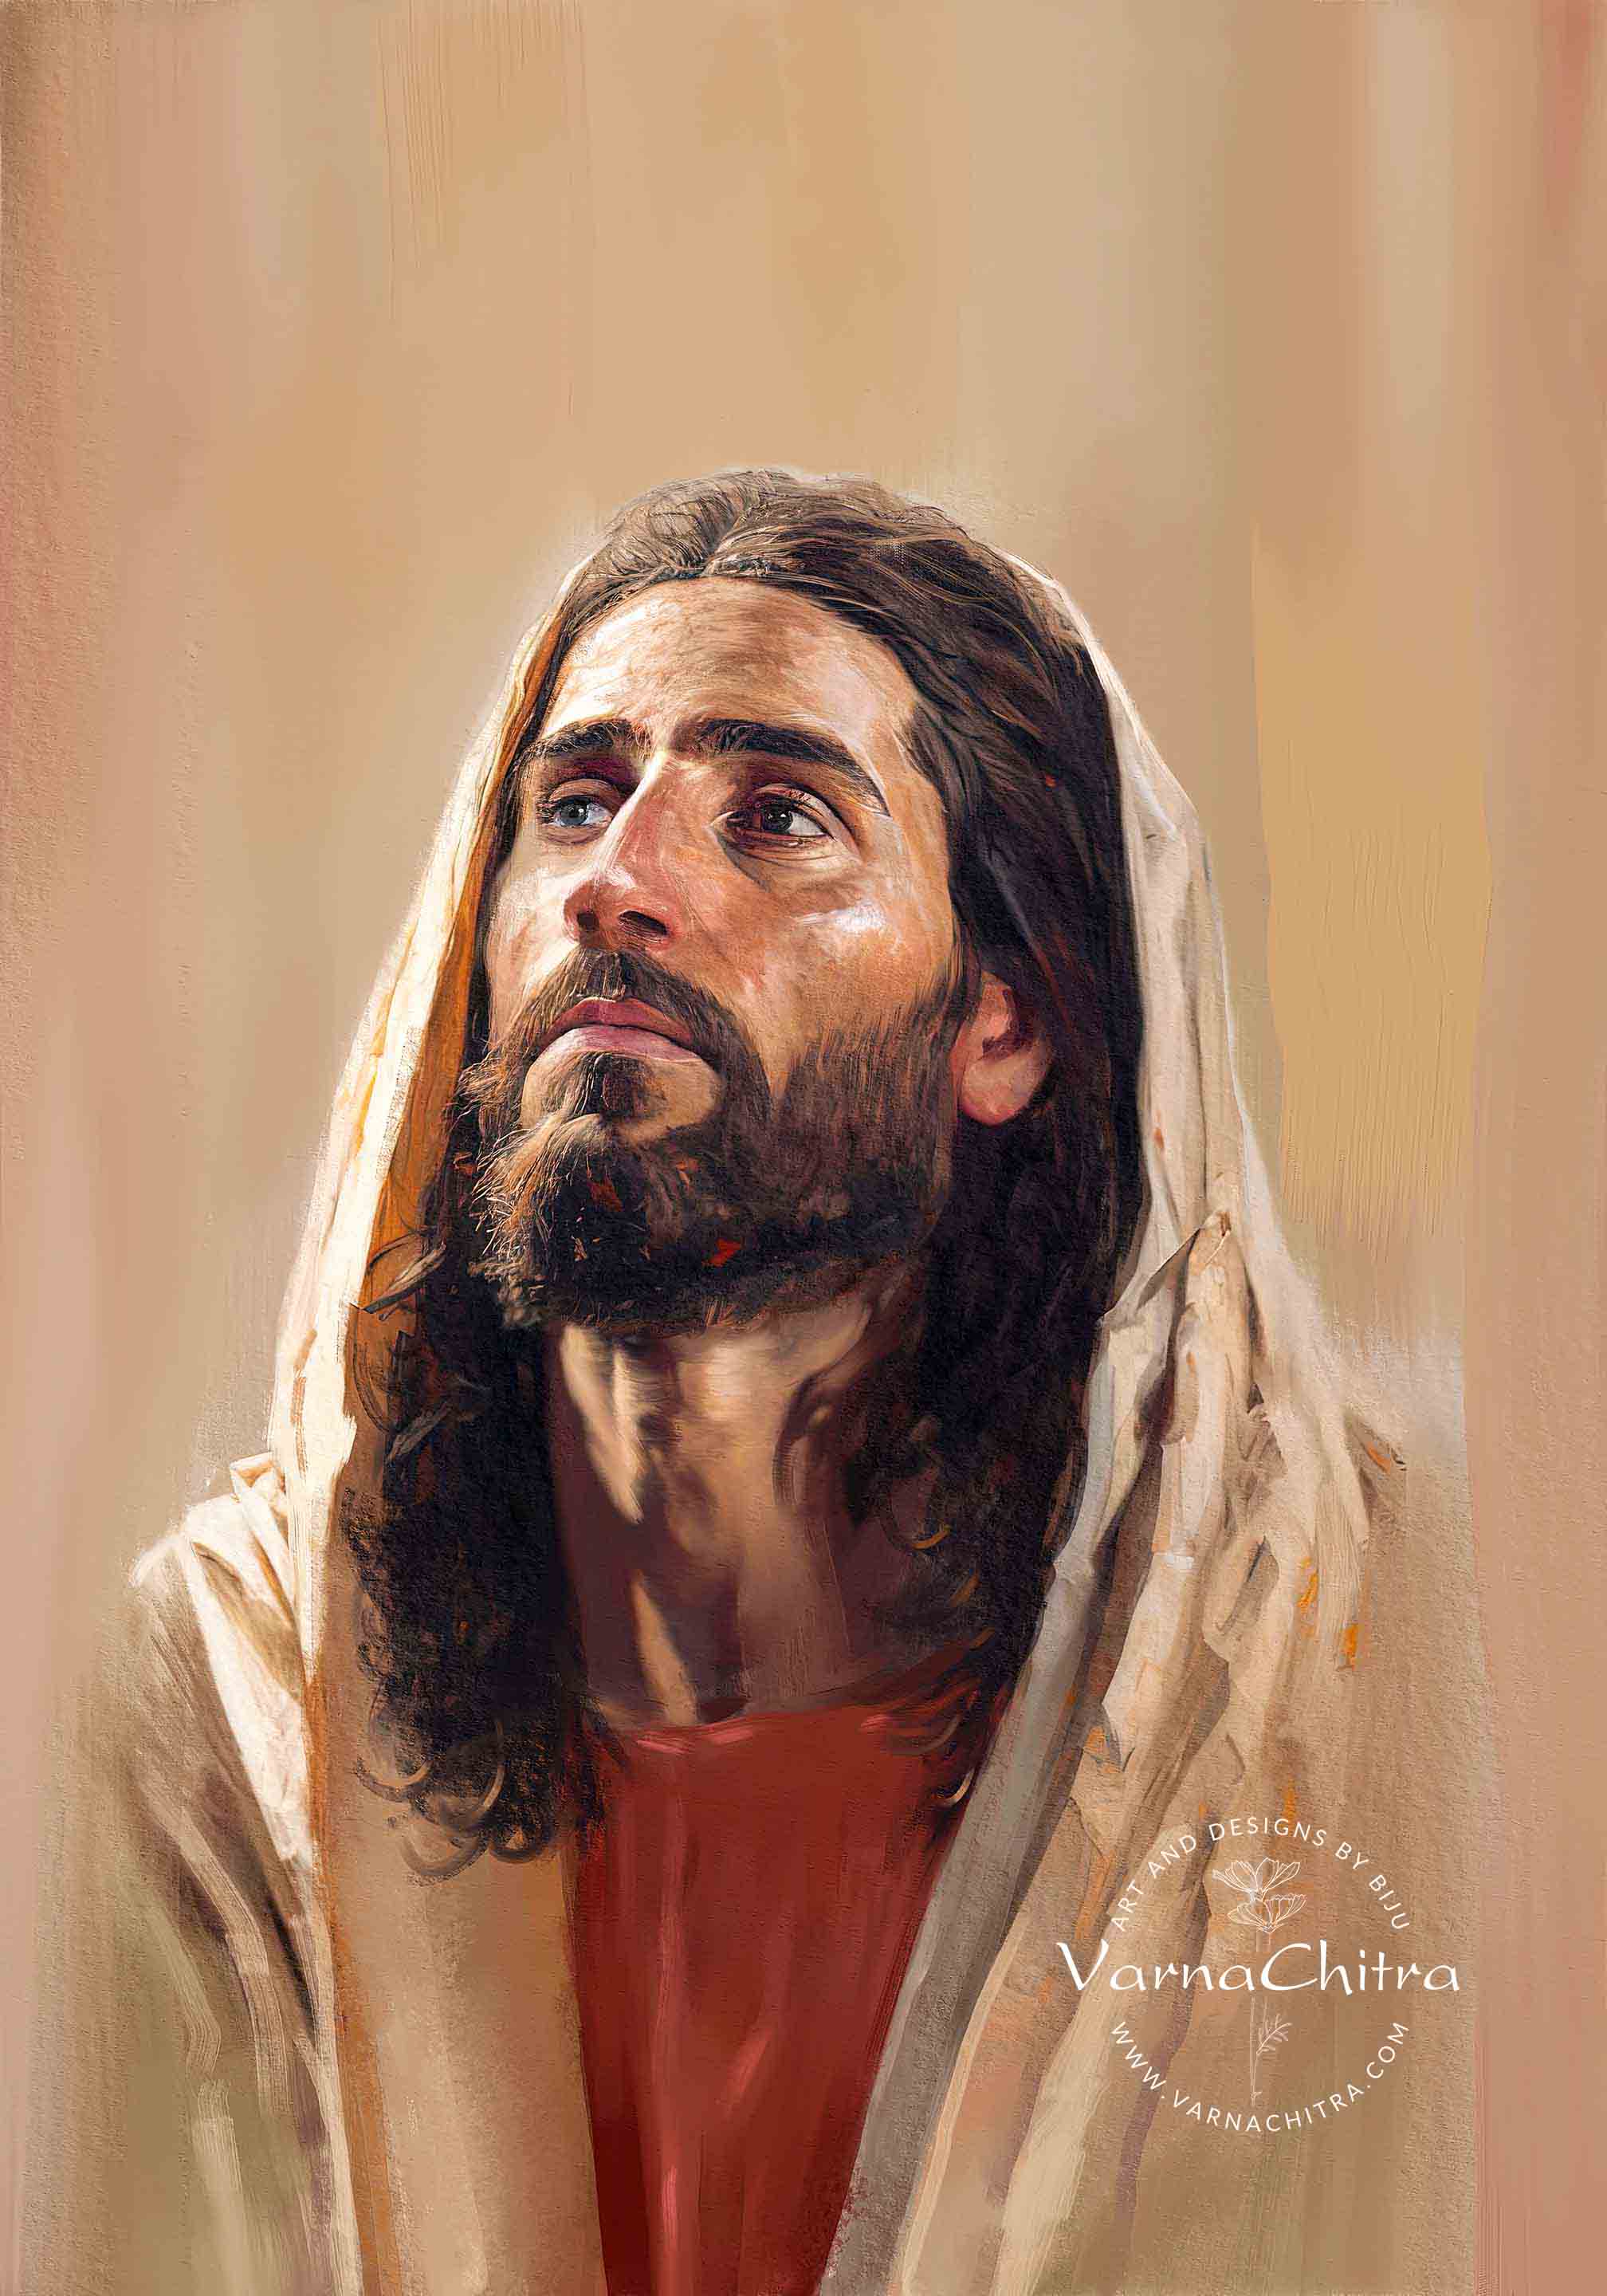 Jesus 4, Painting done digitally in Oil Painting, Alla Prima, Impasto style